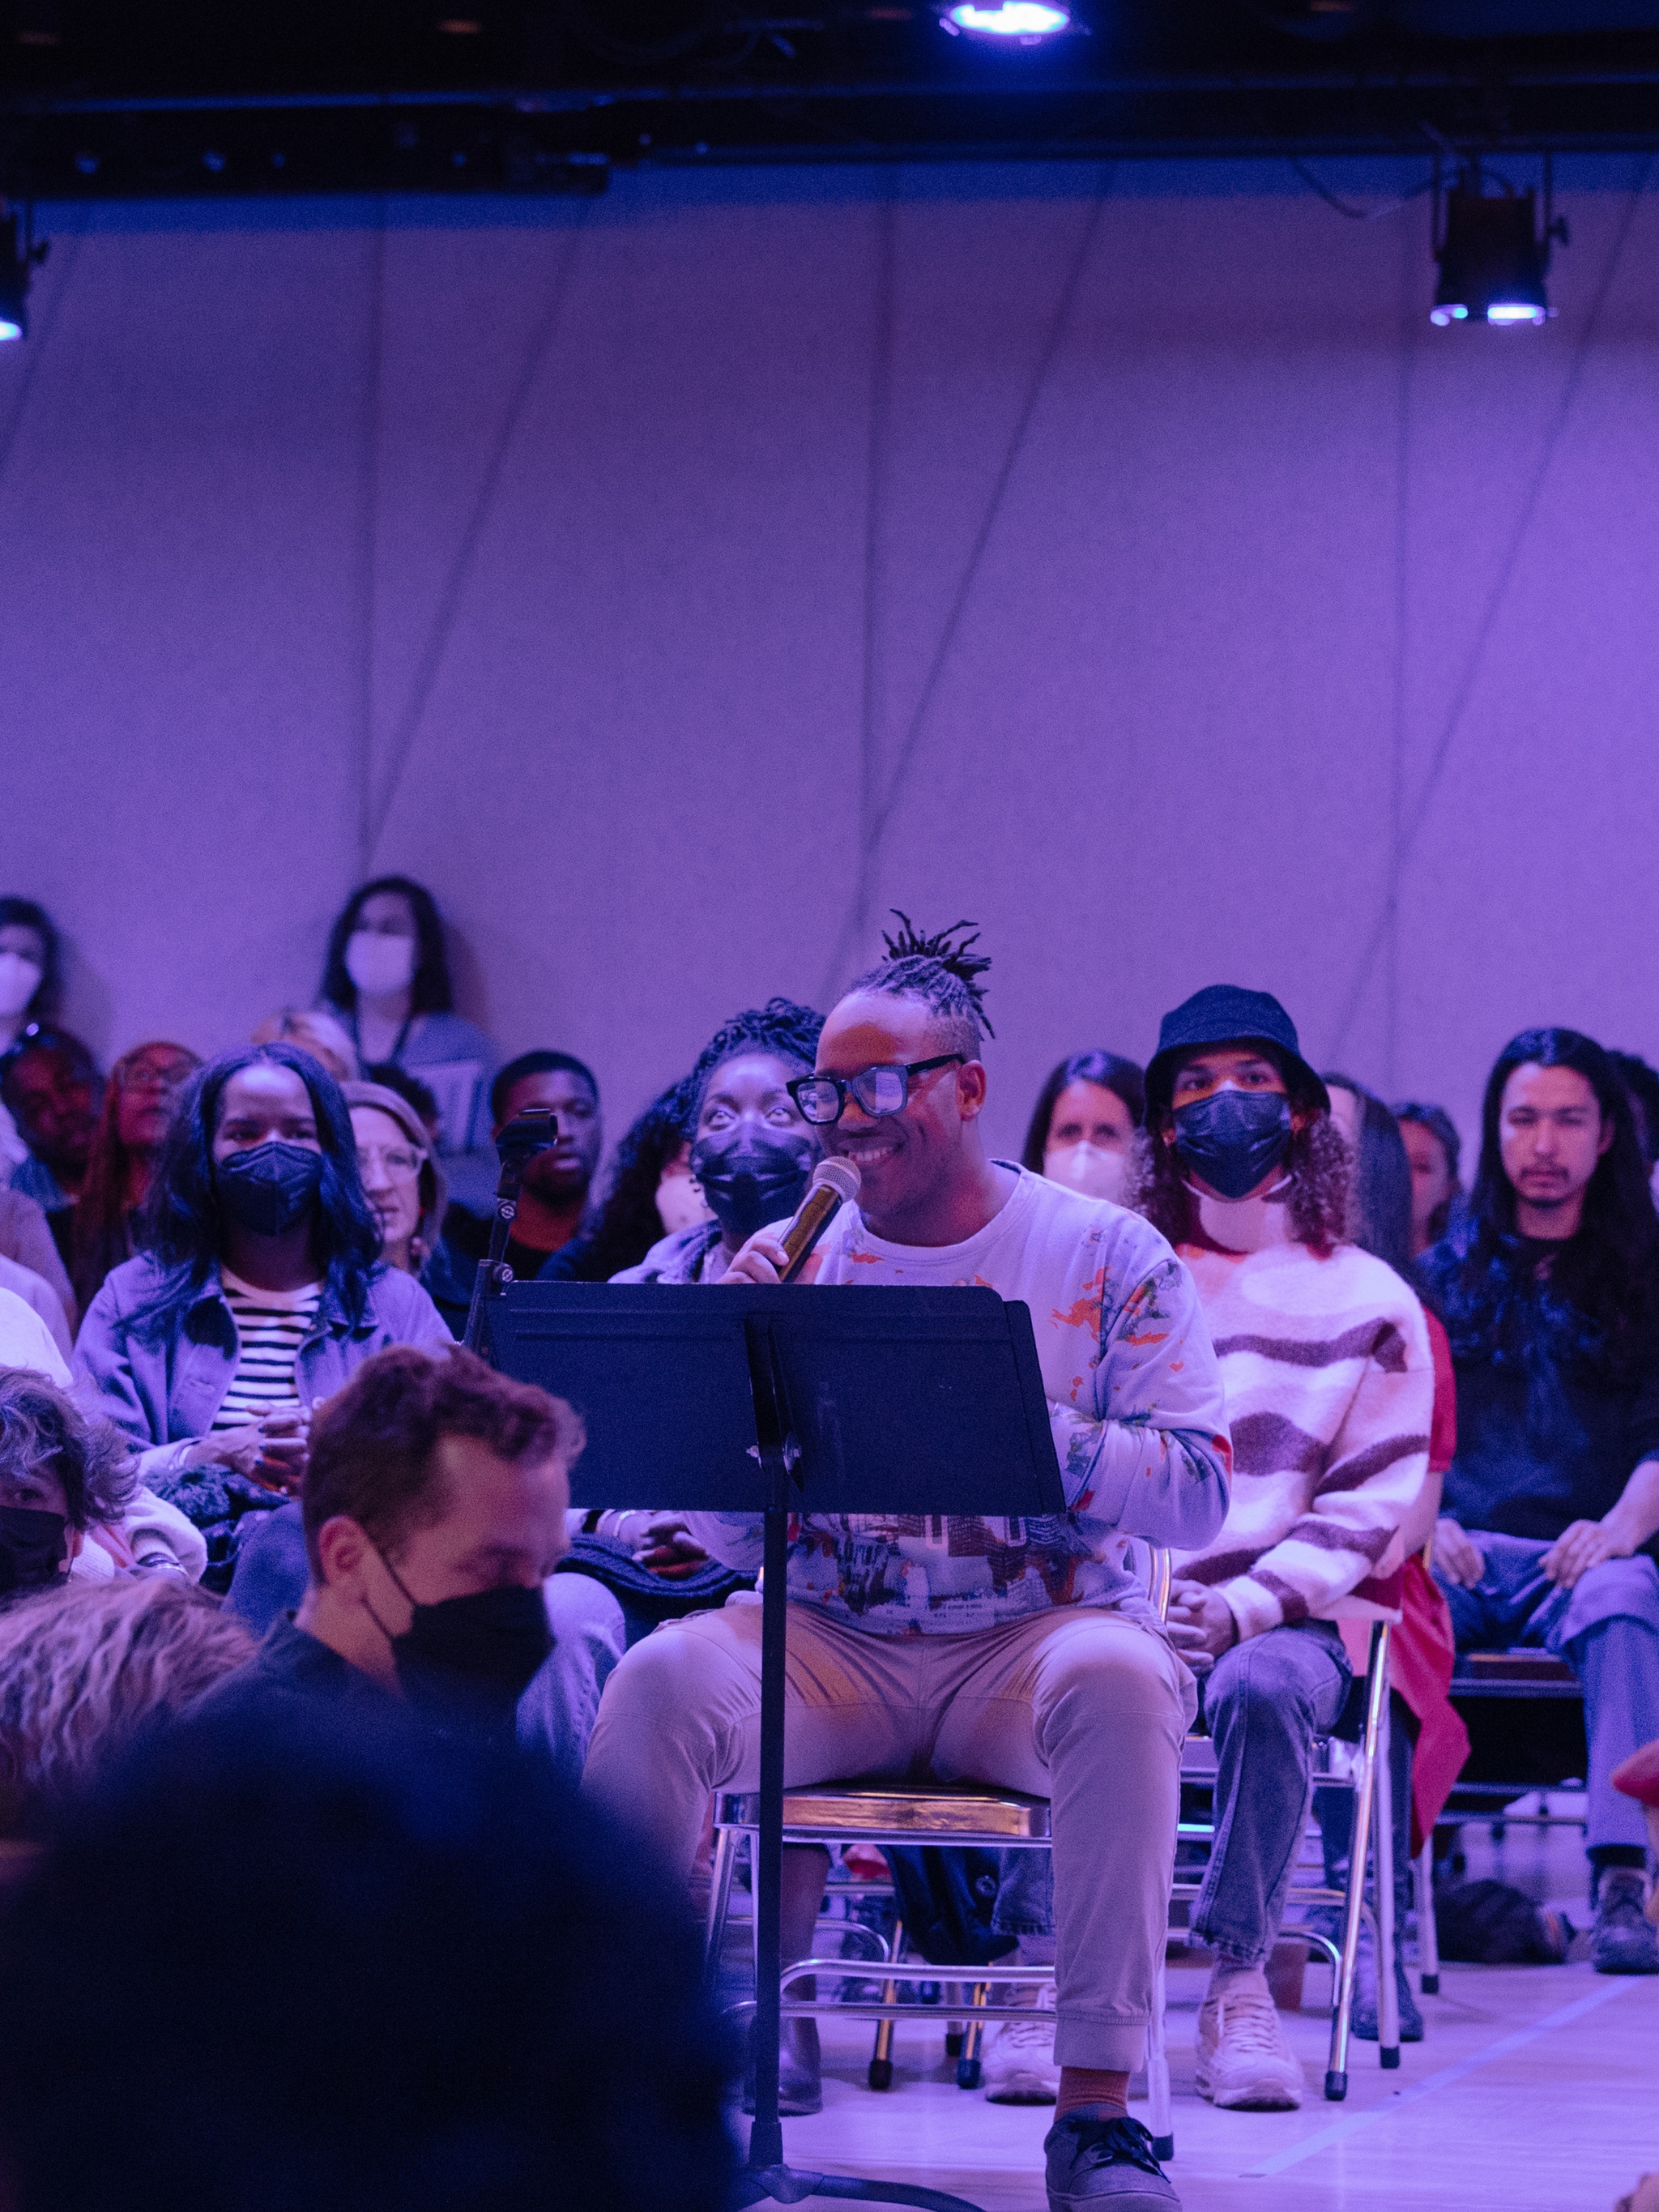 A performance space suffused in purple light. Choir members sit in chairs arranged in multiple rows in a circle with audience members mixed in. At the center, Troy Anthony, a Black man and artistic director of The Fire Ensemble, speaks into a microphone.